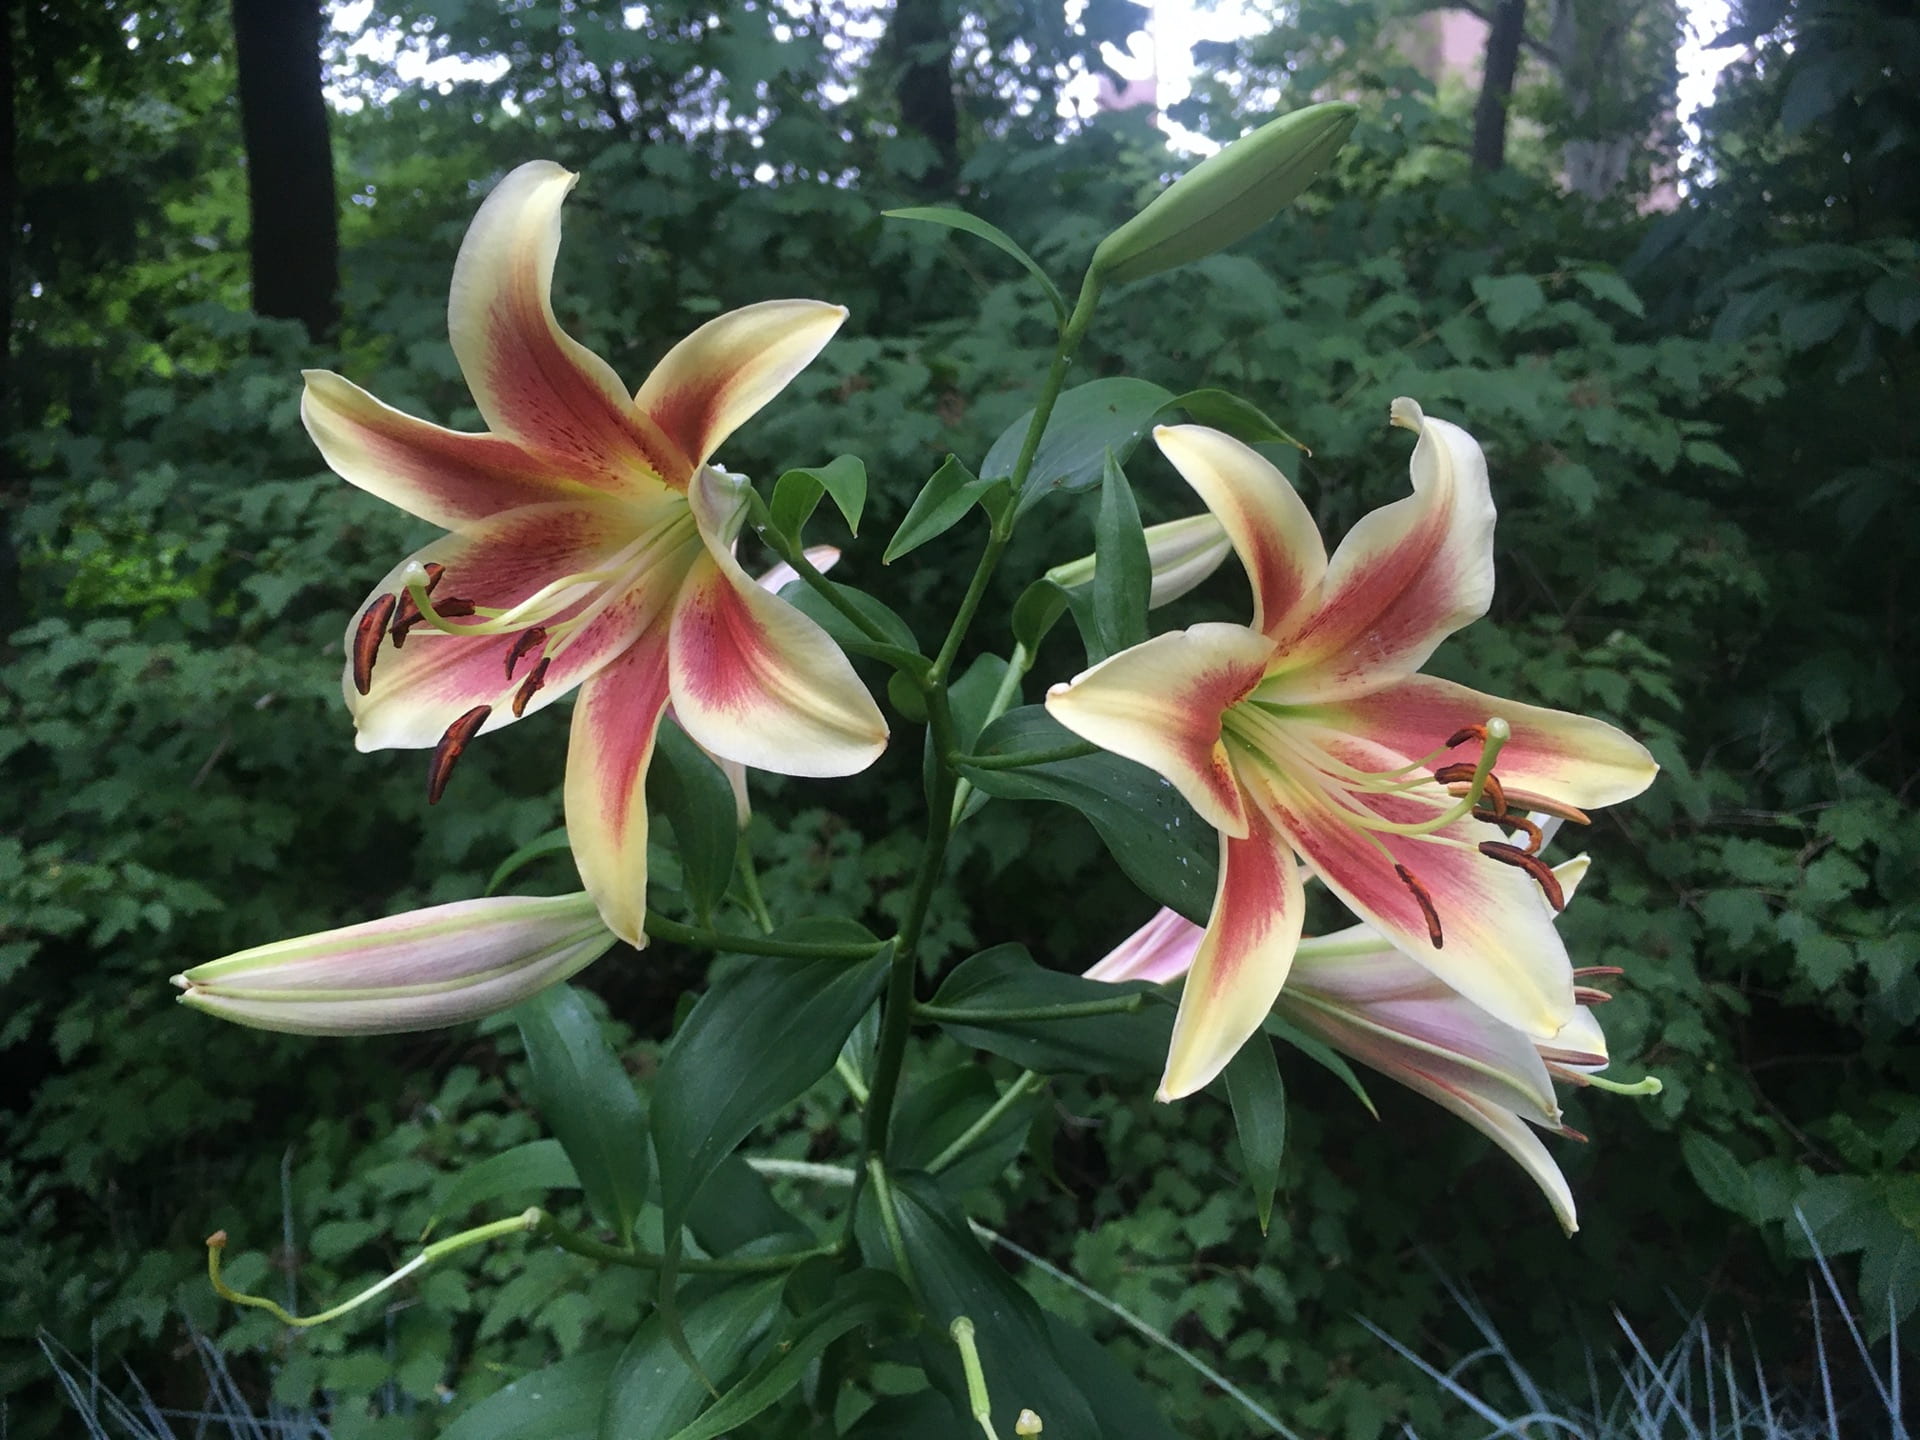 Oriental lily flowers greet park visitors as they enter the garden.